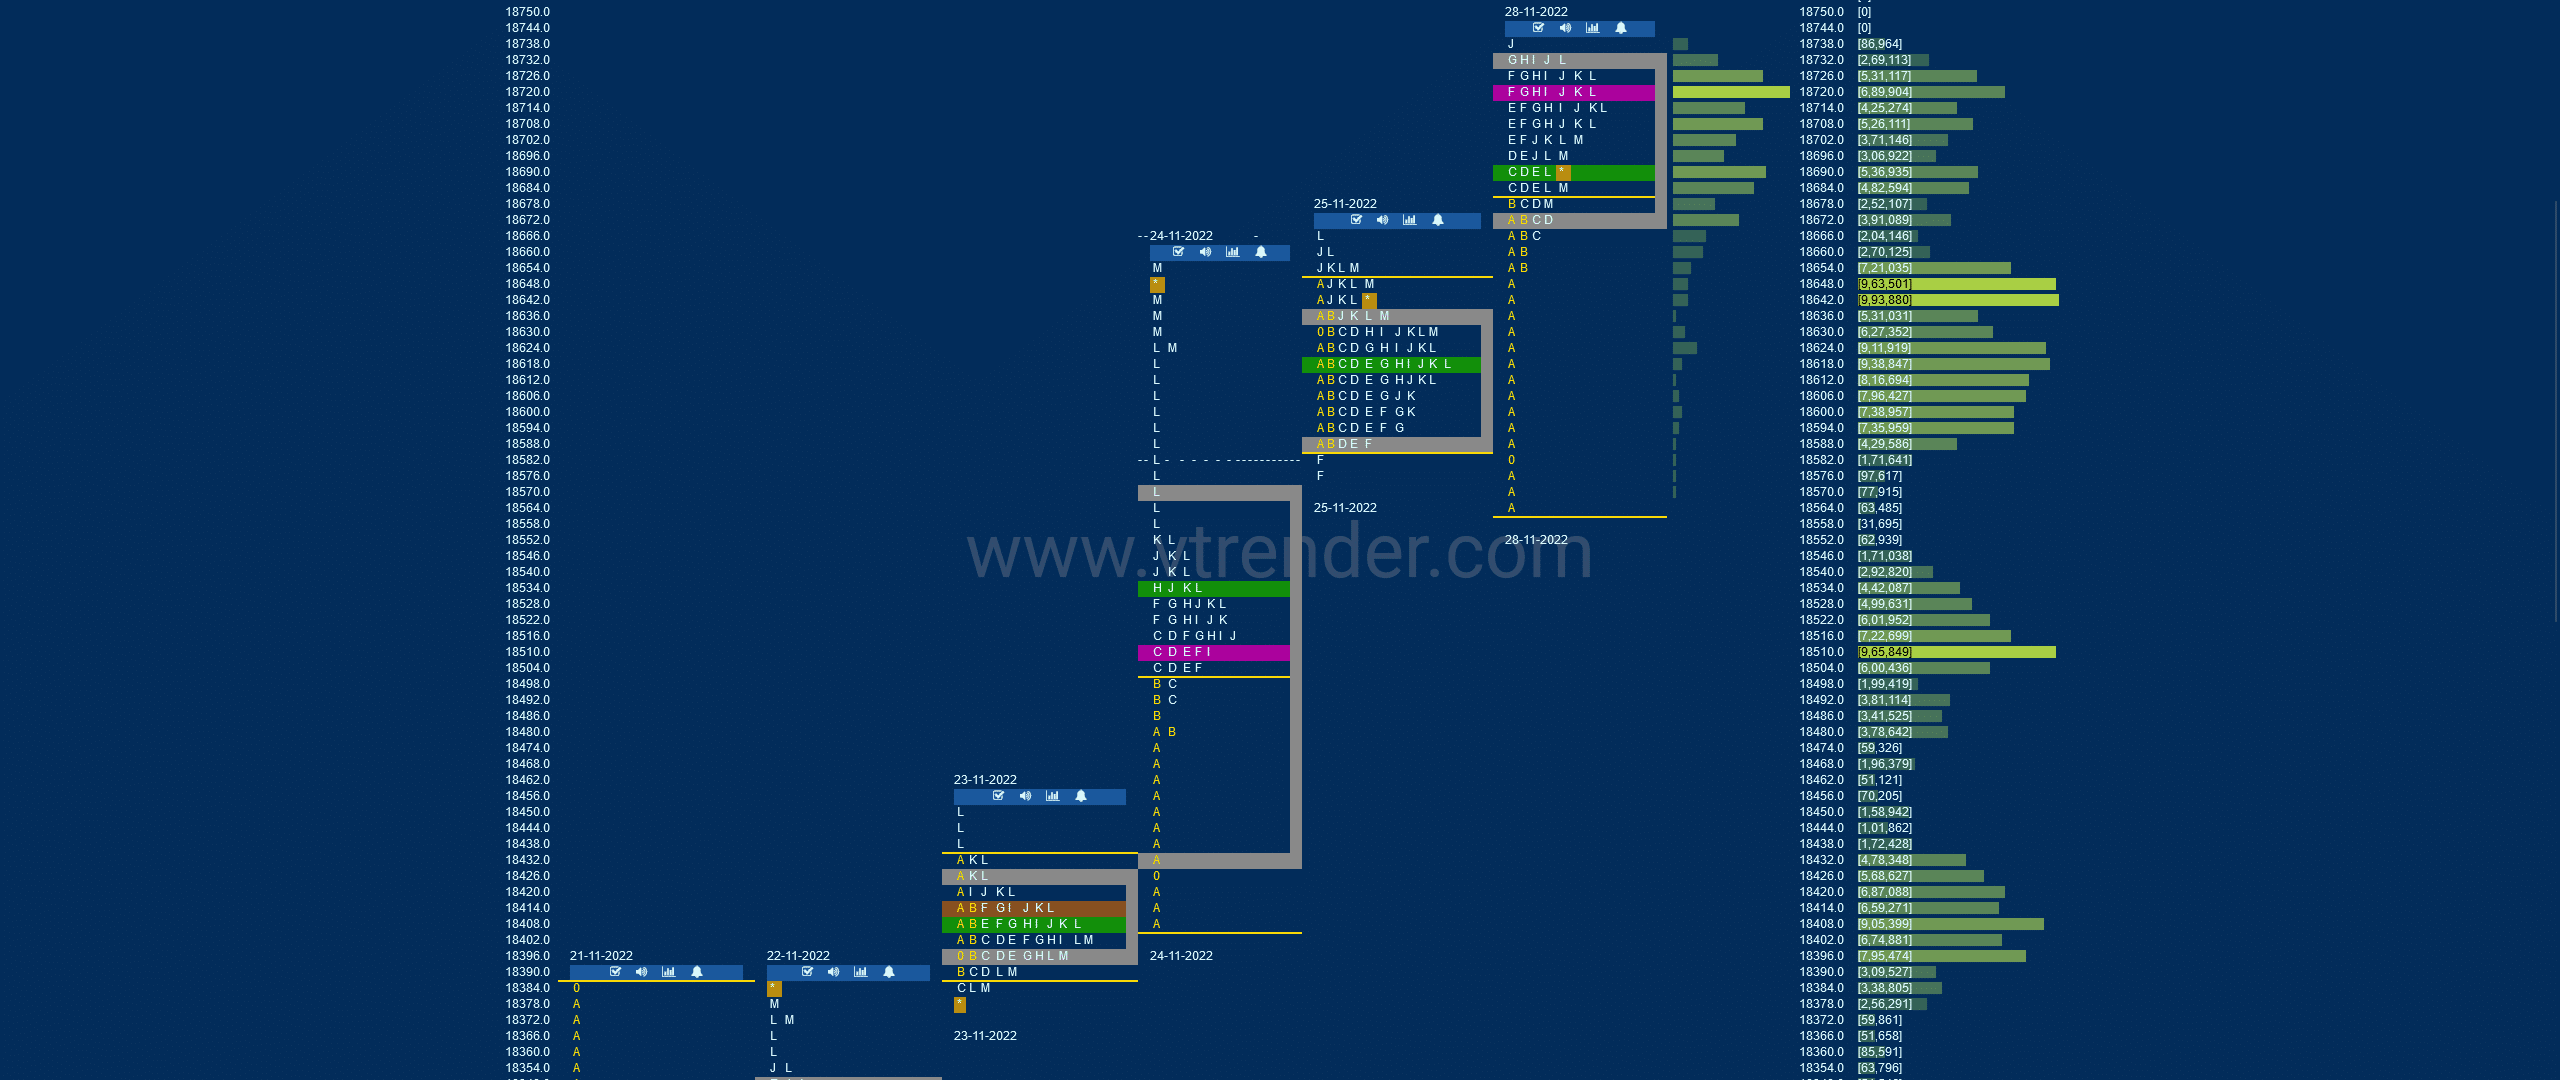 Nf 19 Market Profile Analysis Dated 28Th Nov 2022 Banknifty Futures, Charts, Day Trading, Intraday Trading, Intraday Trading Strategies, Market Profile, Market Profile Trading Strategies, Nifty Futures, Order Flow Analysis, Support And Resistance, Technical Analysis, Trading Strategies, Volume Profile Trading